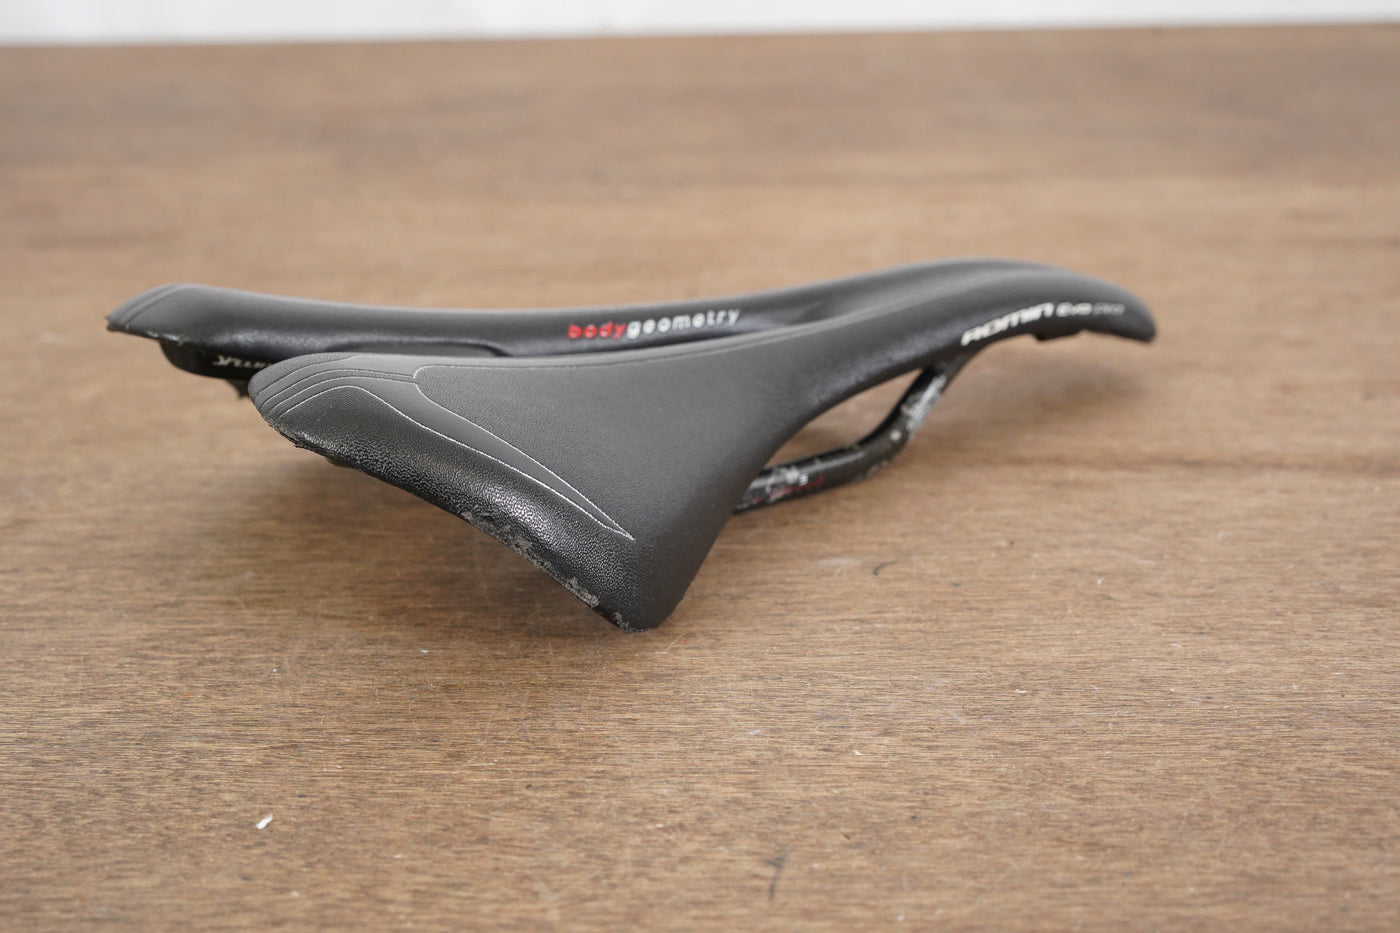 143mm Specialized Romin Evo Pro Carbon Rail Road Saddle